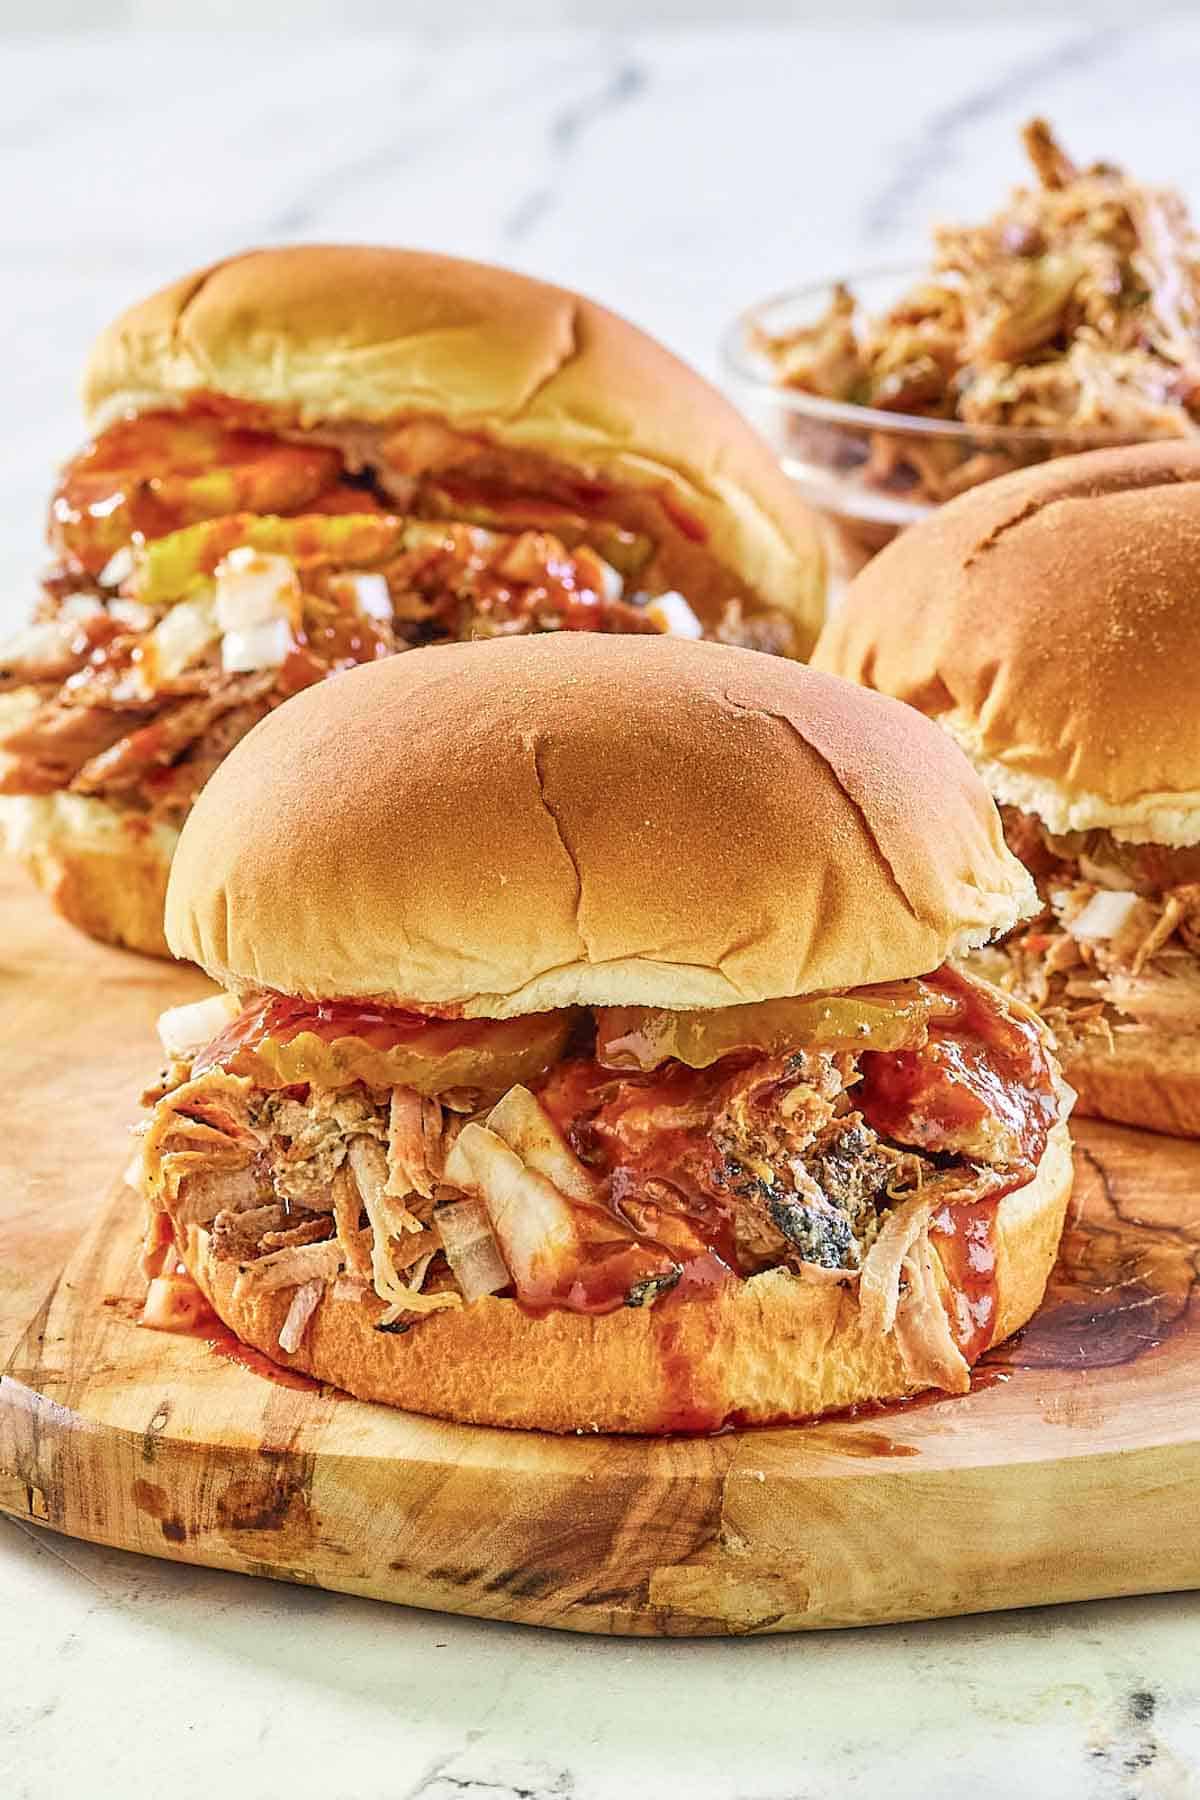 Smoked pulled pork sandwiches on a wood board.